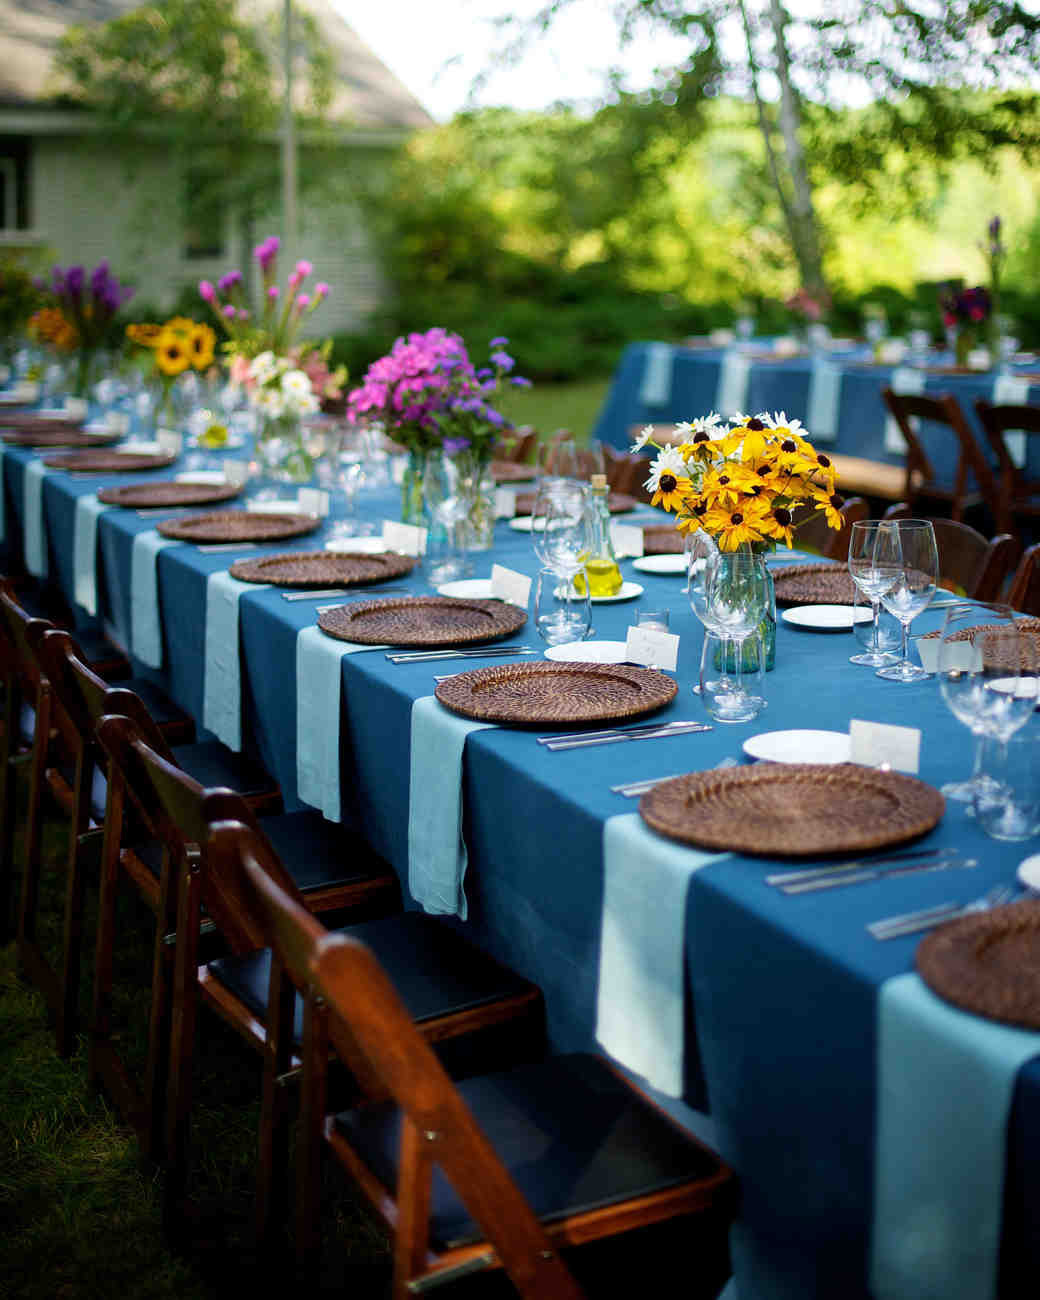 Small Engagement Party Ideas Home
 How to Throw the Perfect Backyard Engagement Party